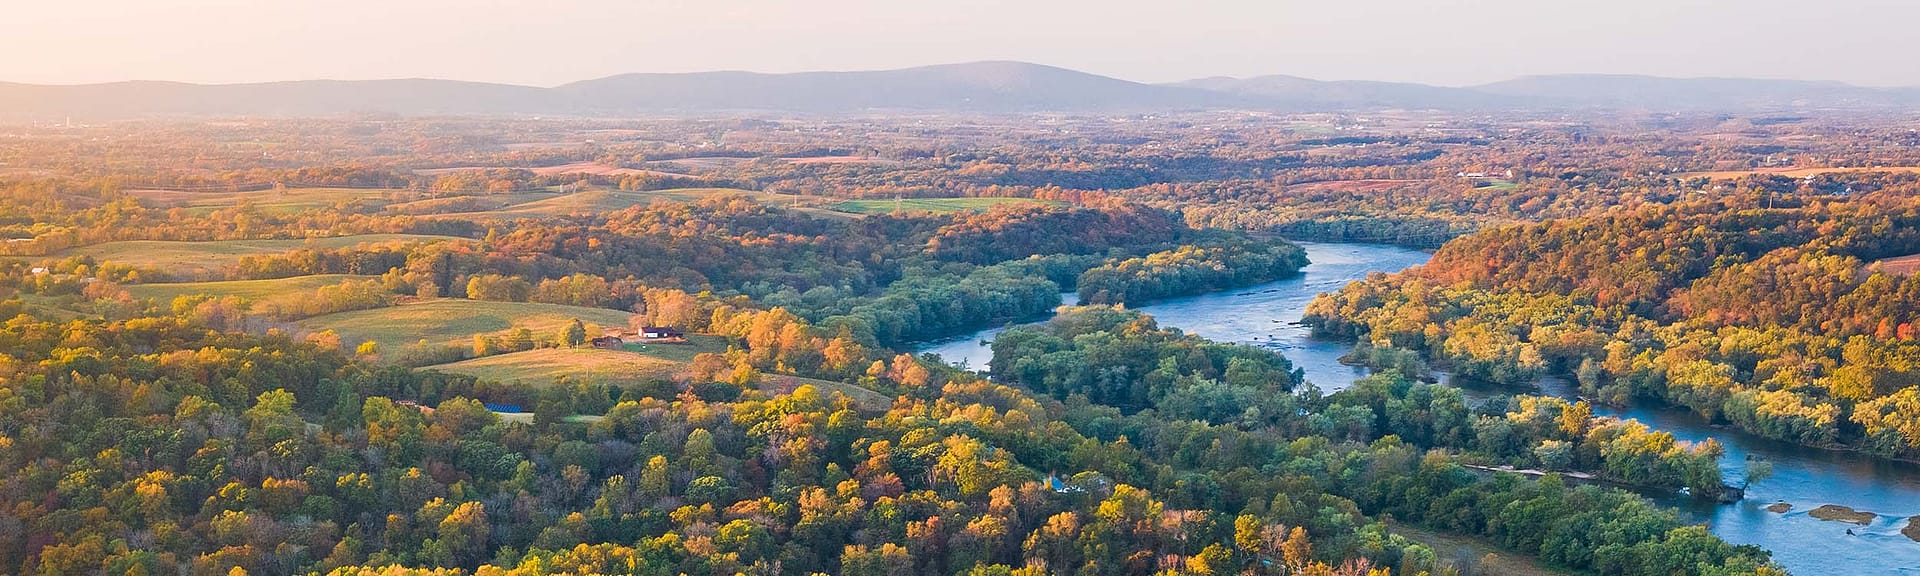 drone image of the Potomac River flowing through a forested rural landscape, with mountains on the horizon